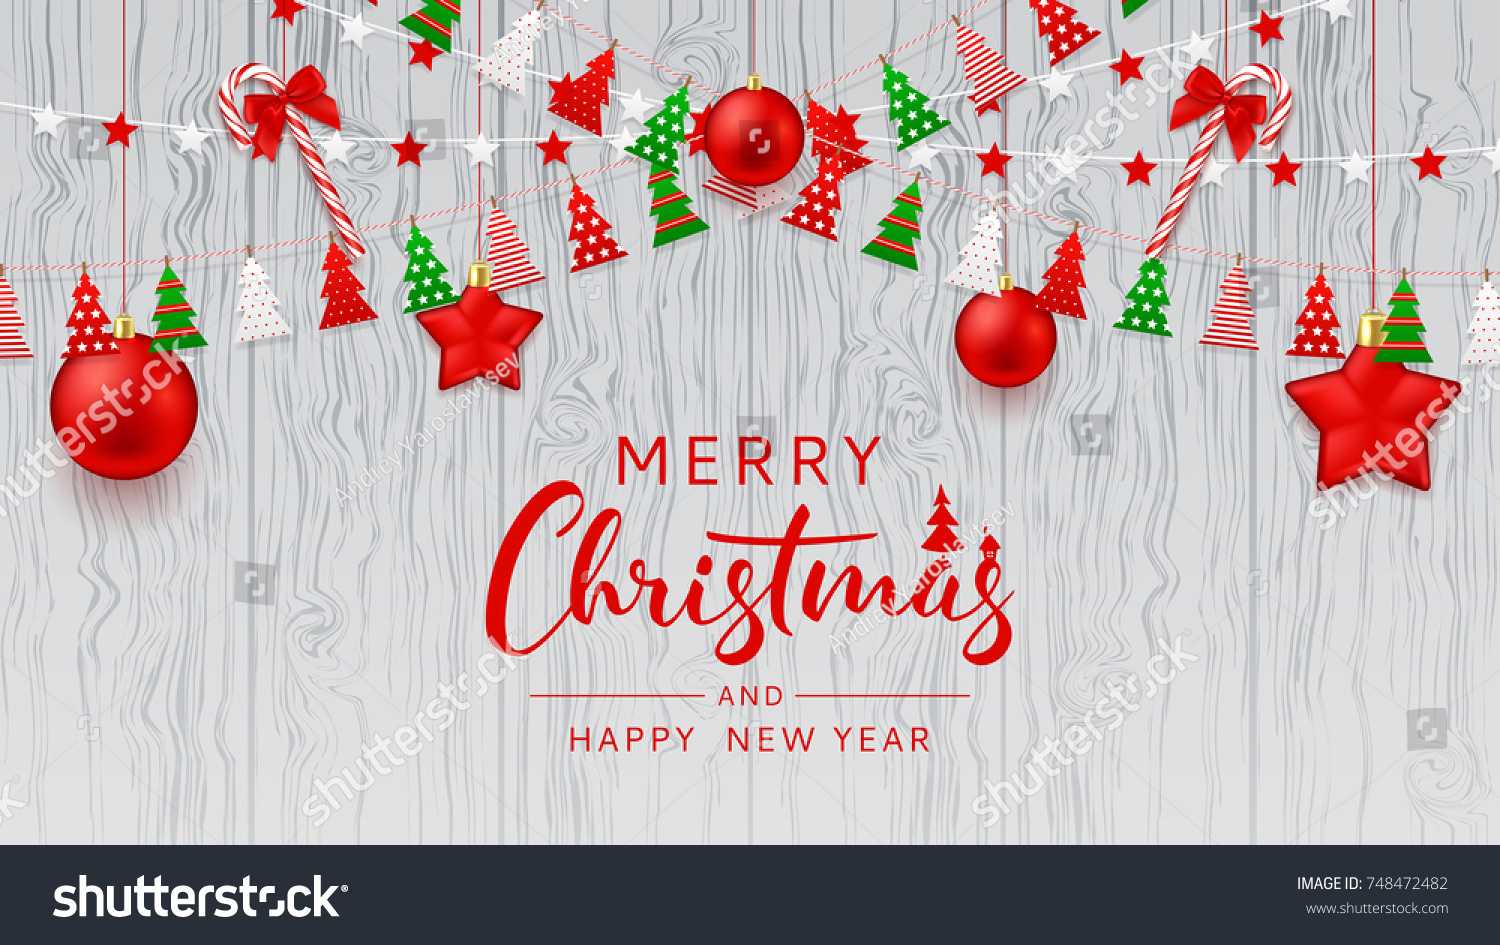 Merry Christmas Web Banner Template Festive | Signs/symbols Pertaining To Merry Christmas Banner Template